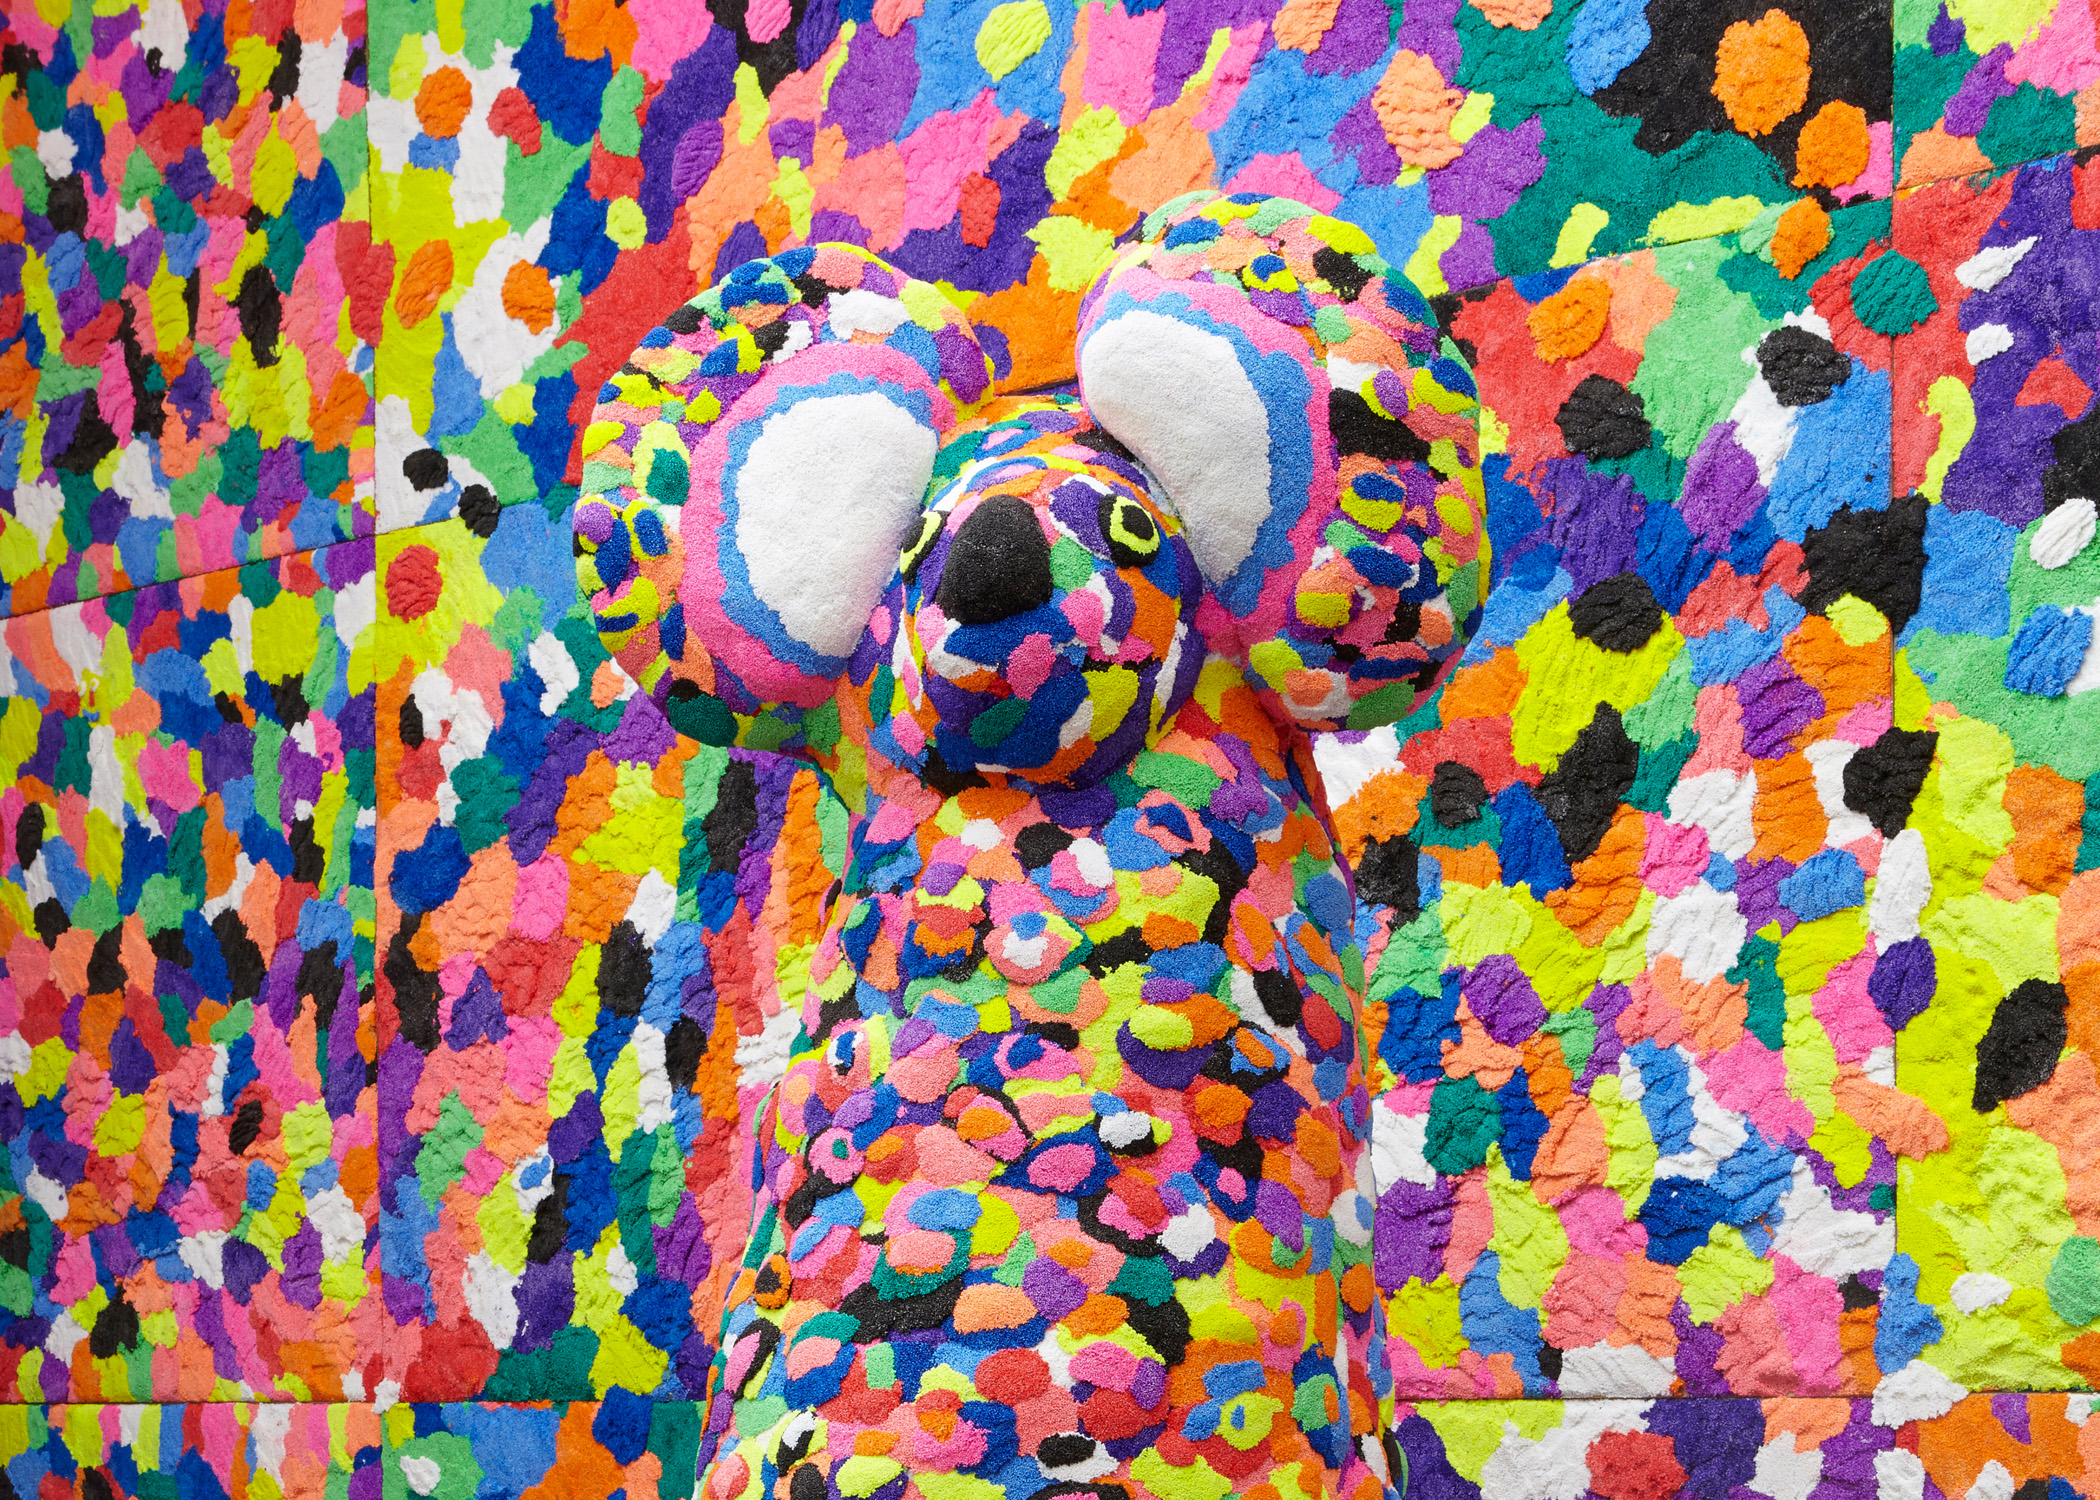 A koala shaped totem covered in foam made up of many different, bright colours. The background is made of the same material.